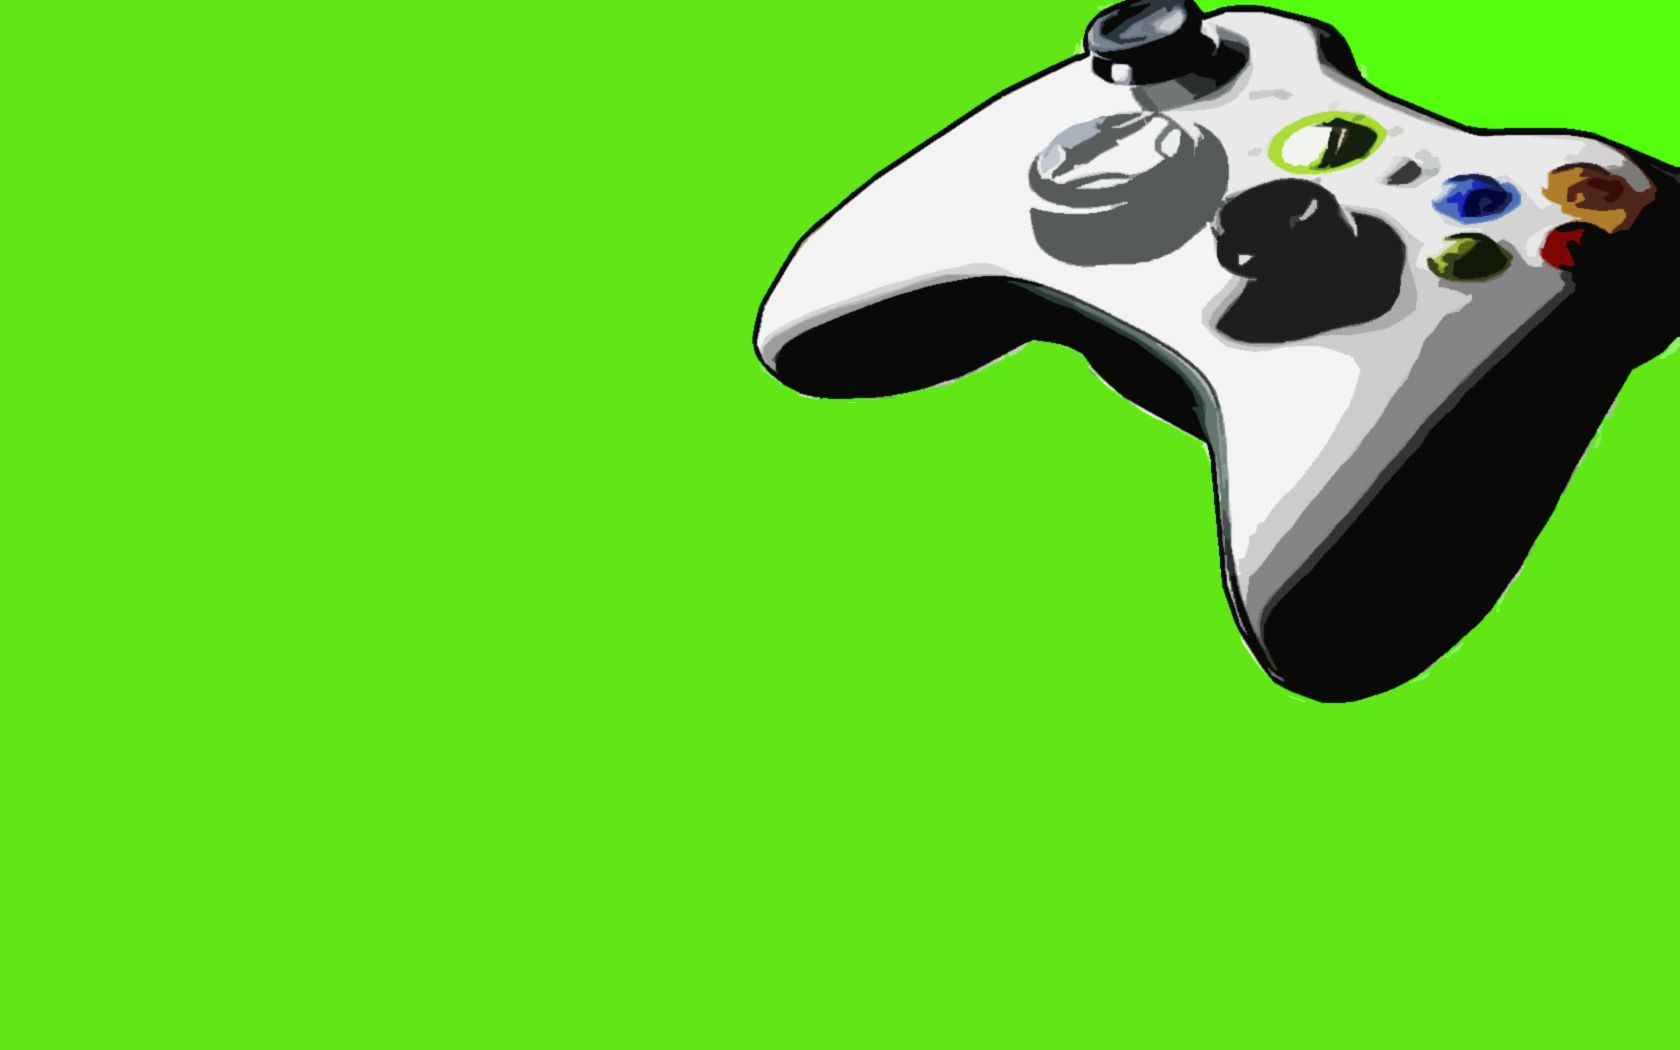 green, video games, Xbox, controllers, Xbox 360, simple background ...